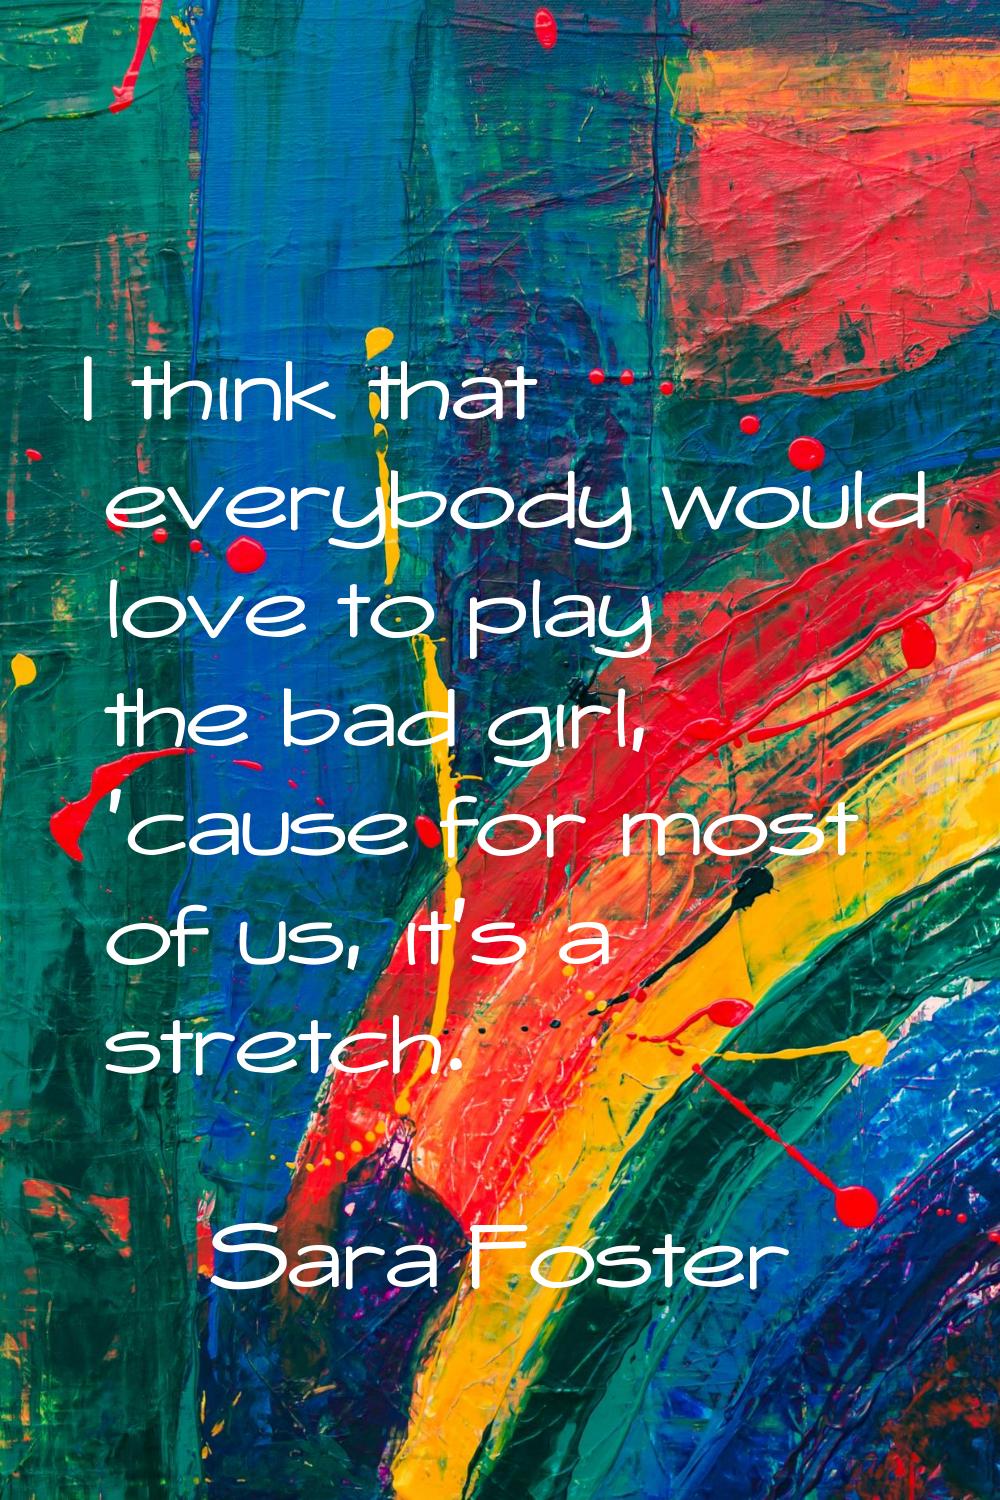 I think that everybody would love to play the bad girl, 'cause for most of us, it's a stretch.